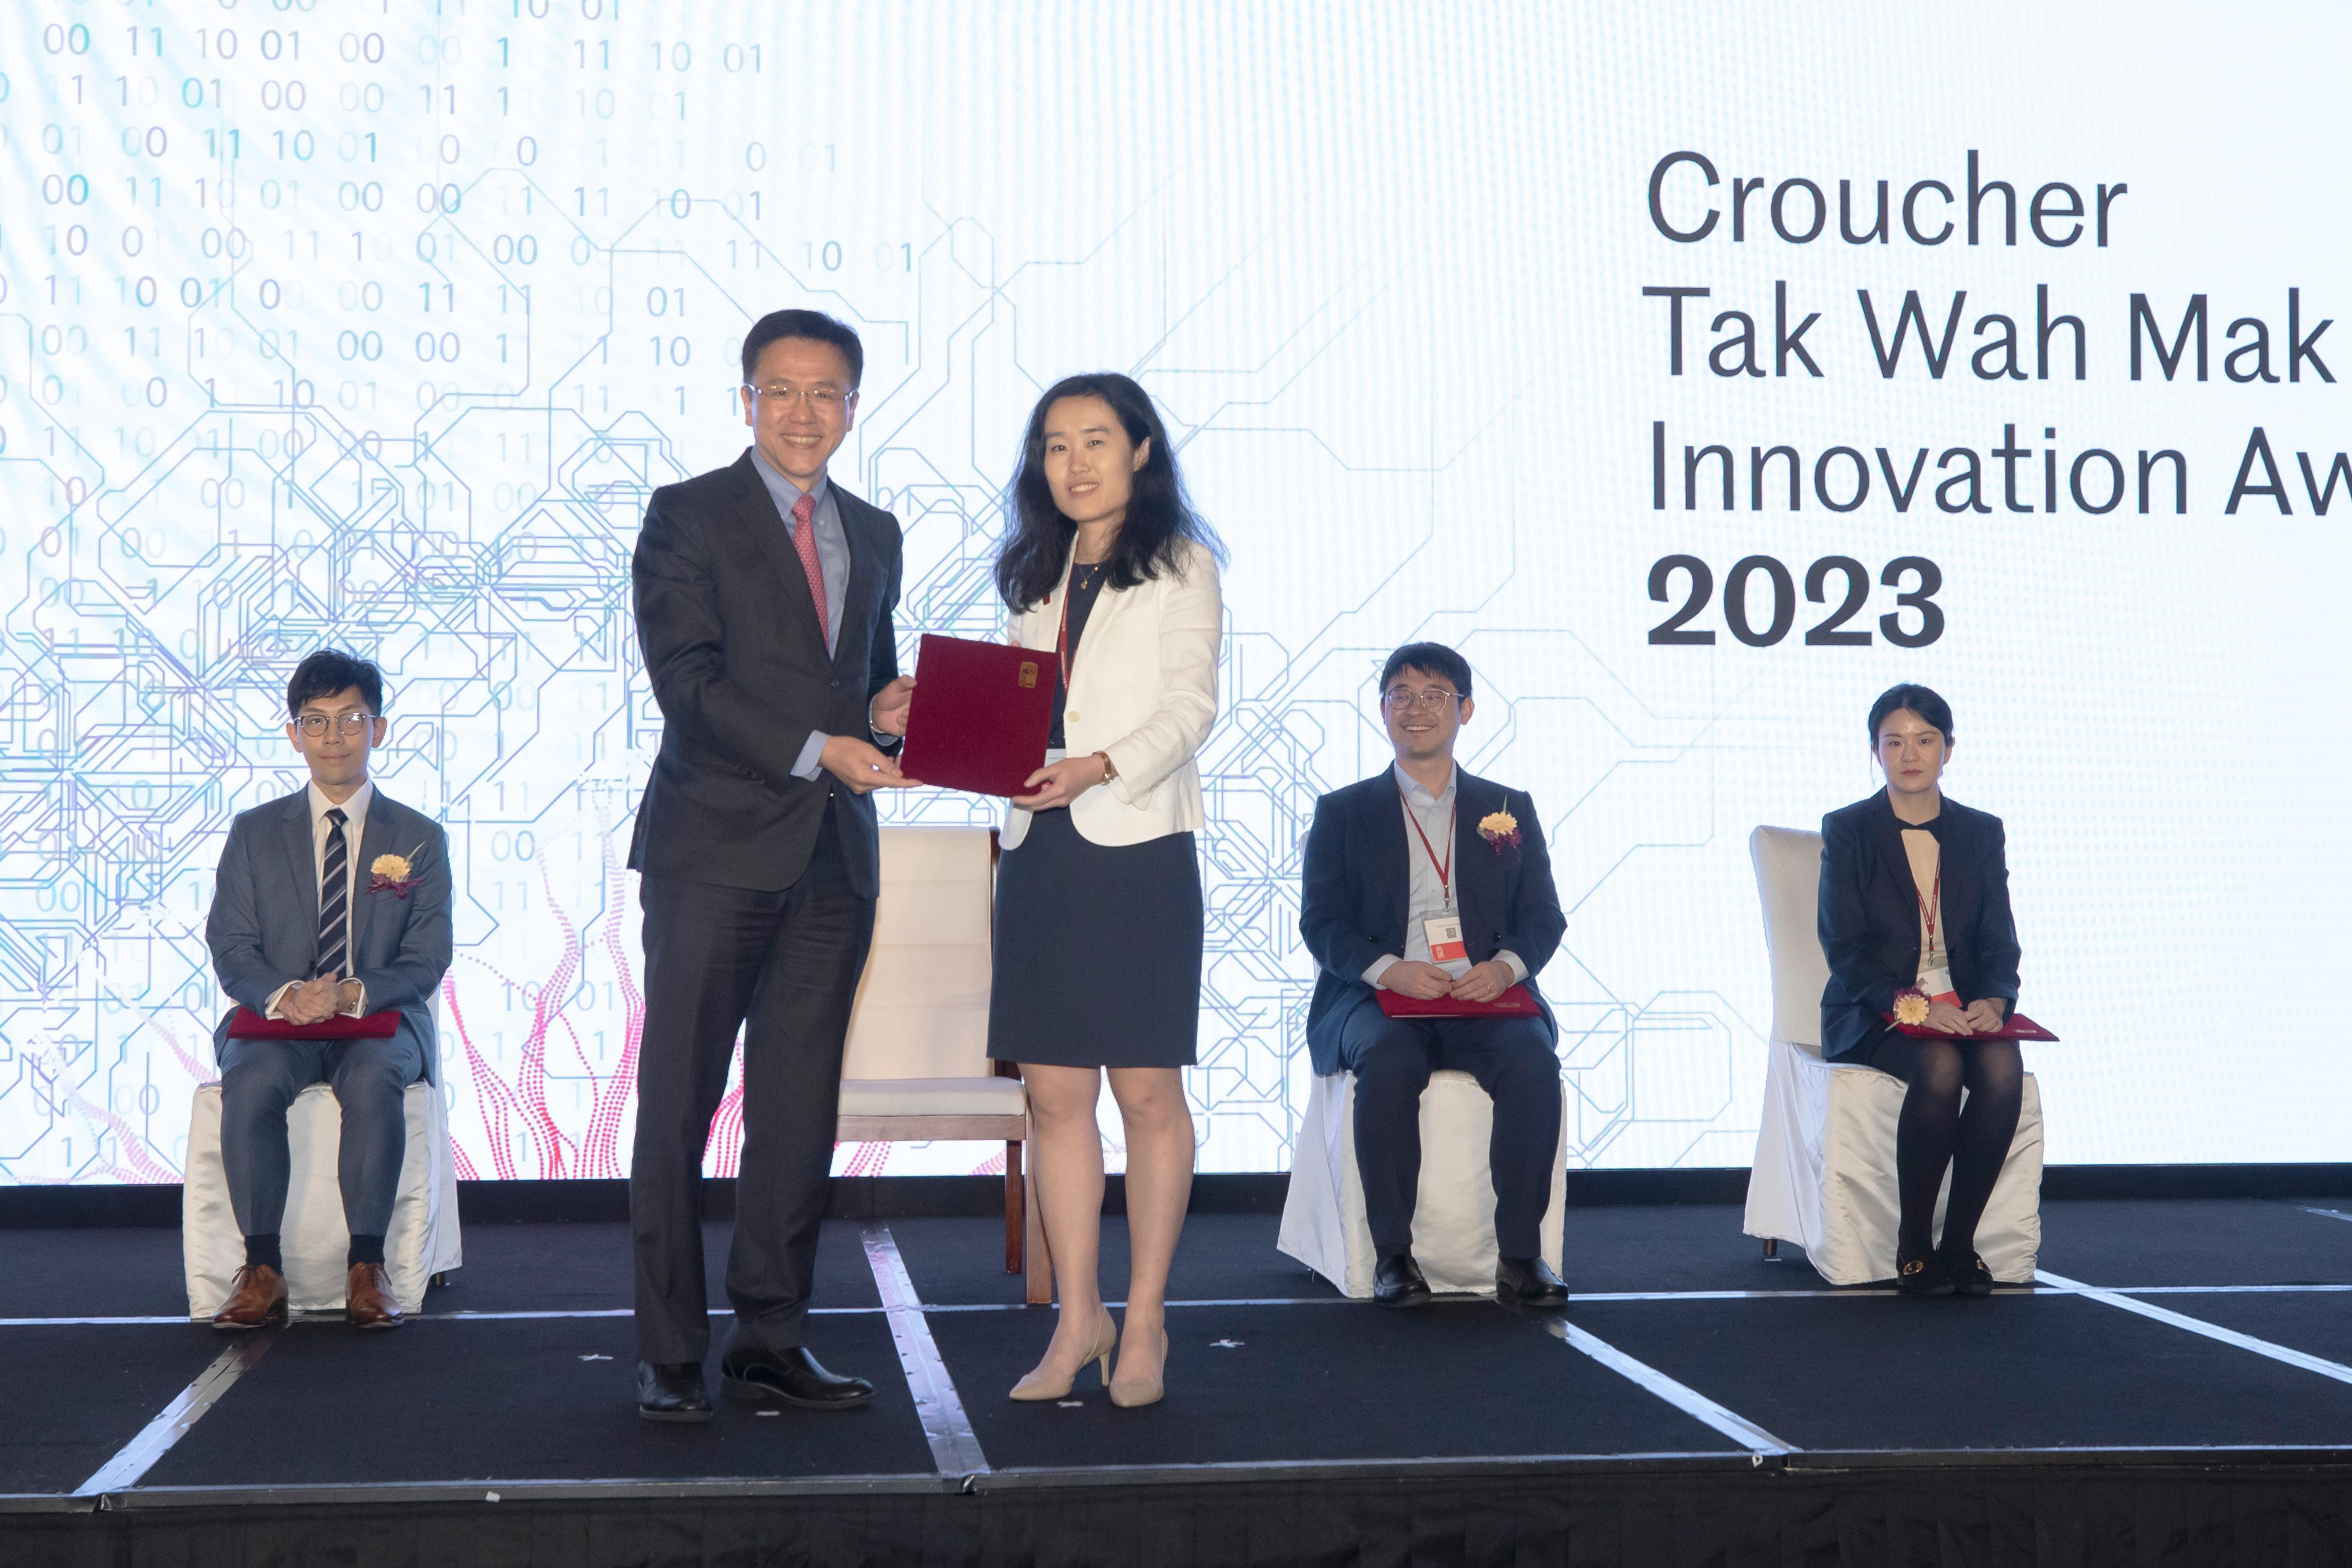 Prof. SUN Dong (left) presents the Croucher Tak Wah Mak Innovation Award 2023 to Dr. WANG Lan (right), Assistant Professor, Division of Life Science, School of Science at the Hong Kong University of Science and Technology.